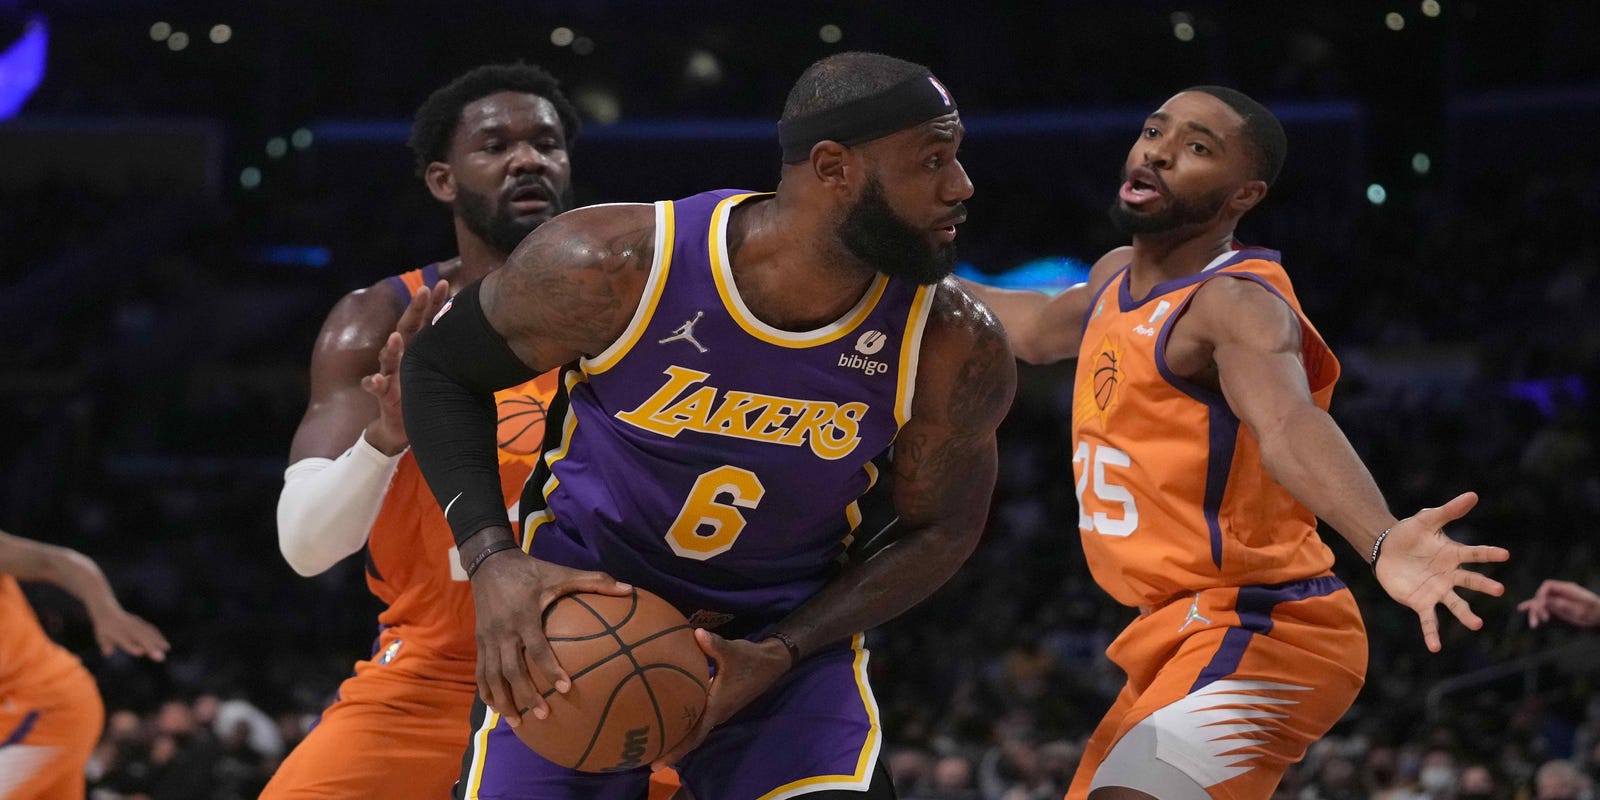 Could Lakers beat Suns in first round series this season? Ask Kenny Smith